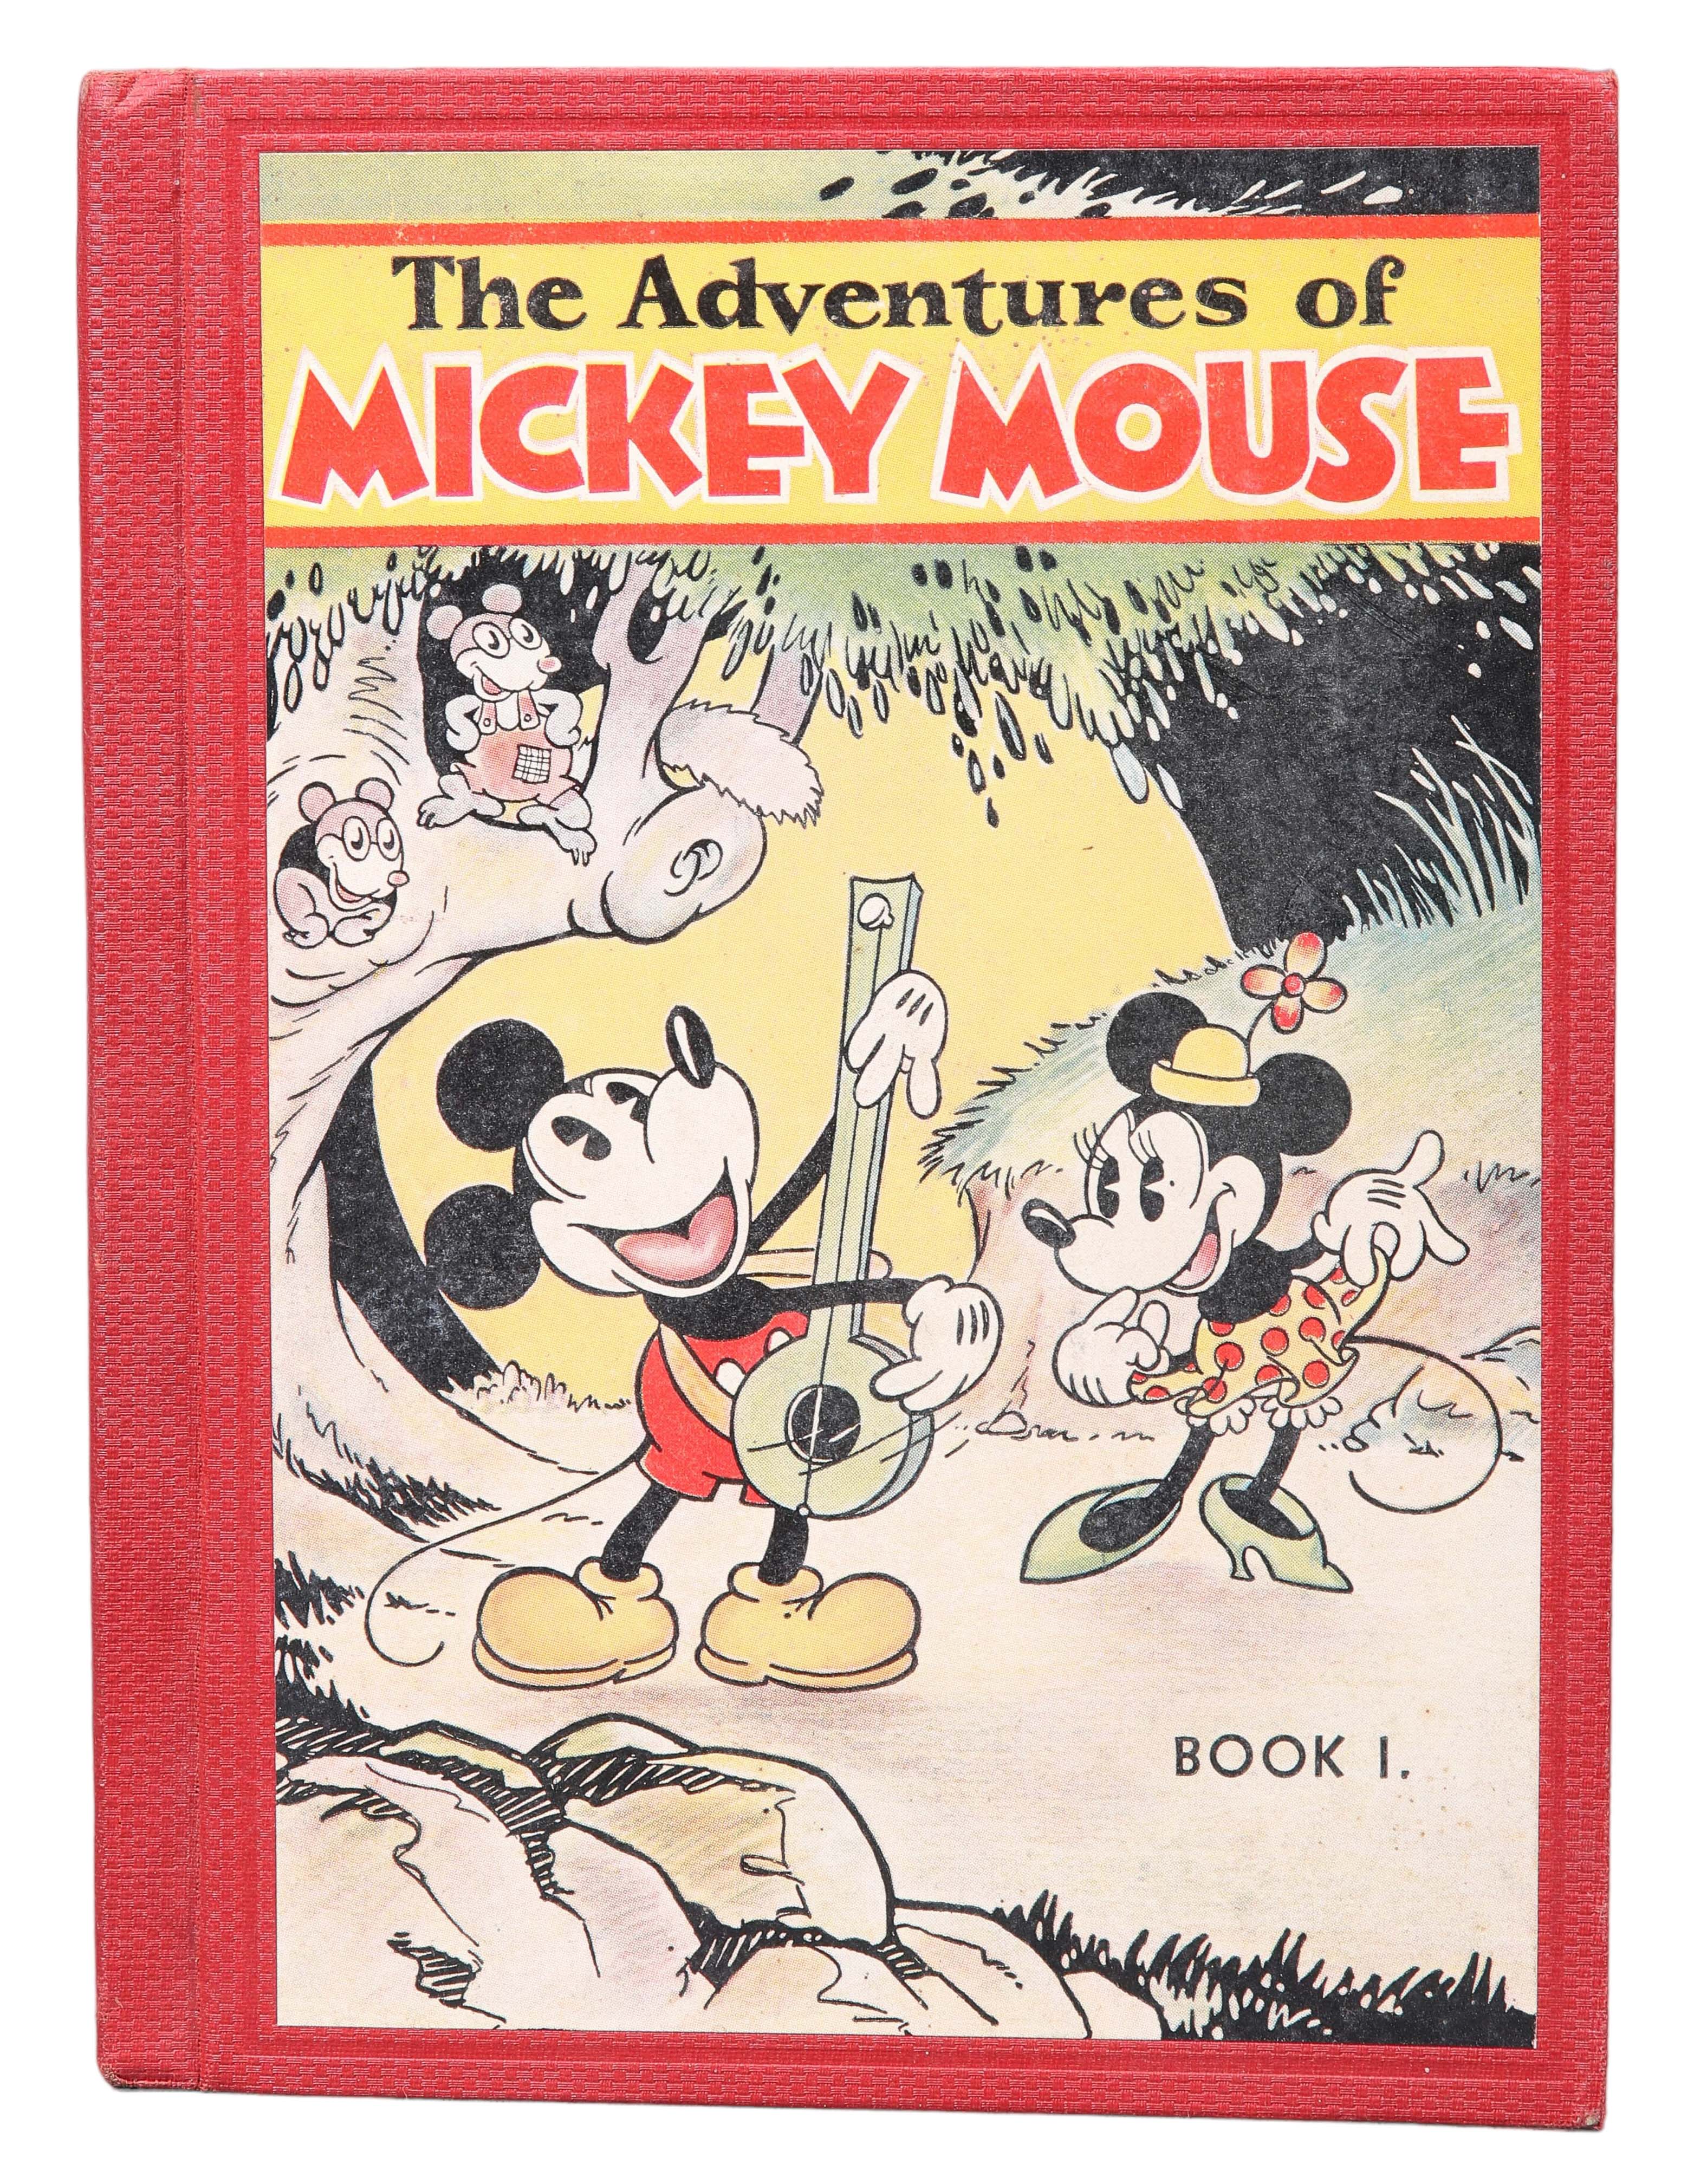 The Adventures of Mickey Mouse